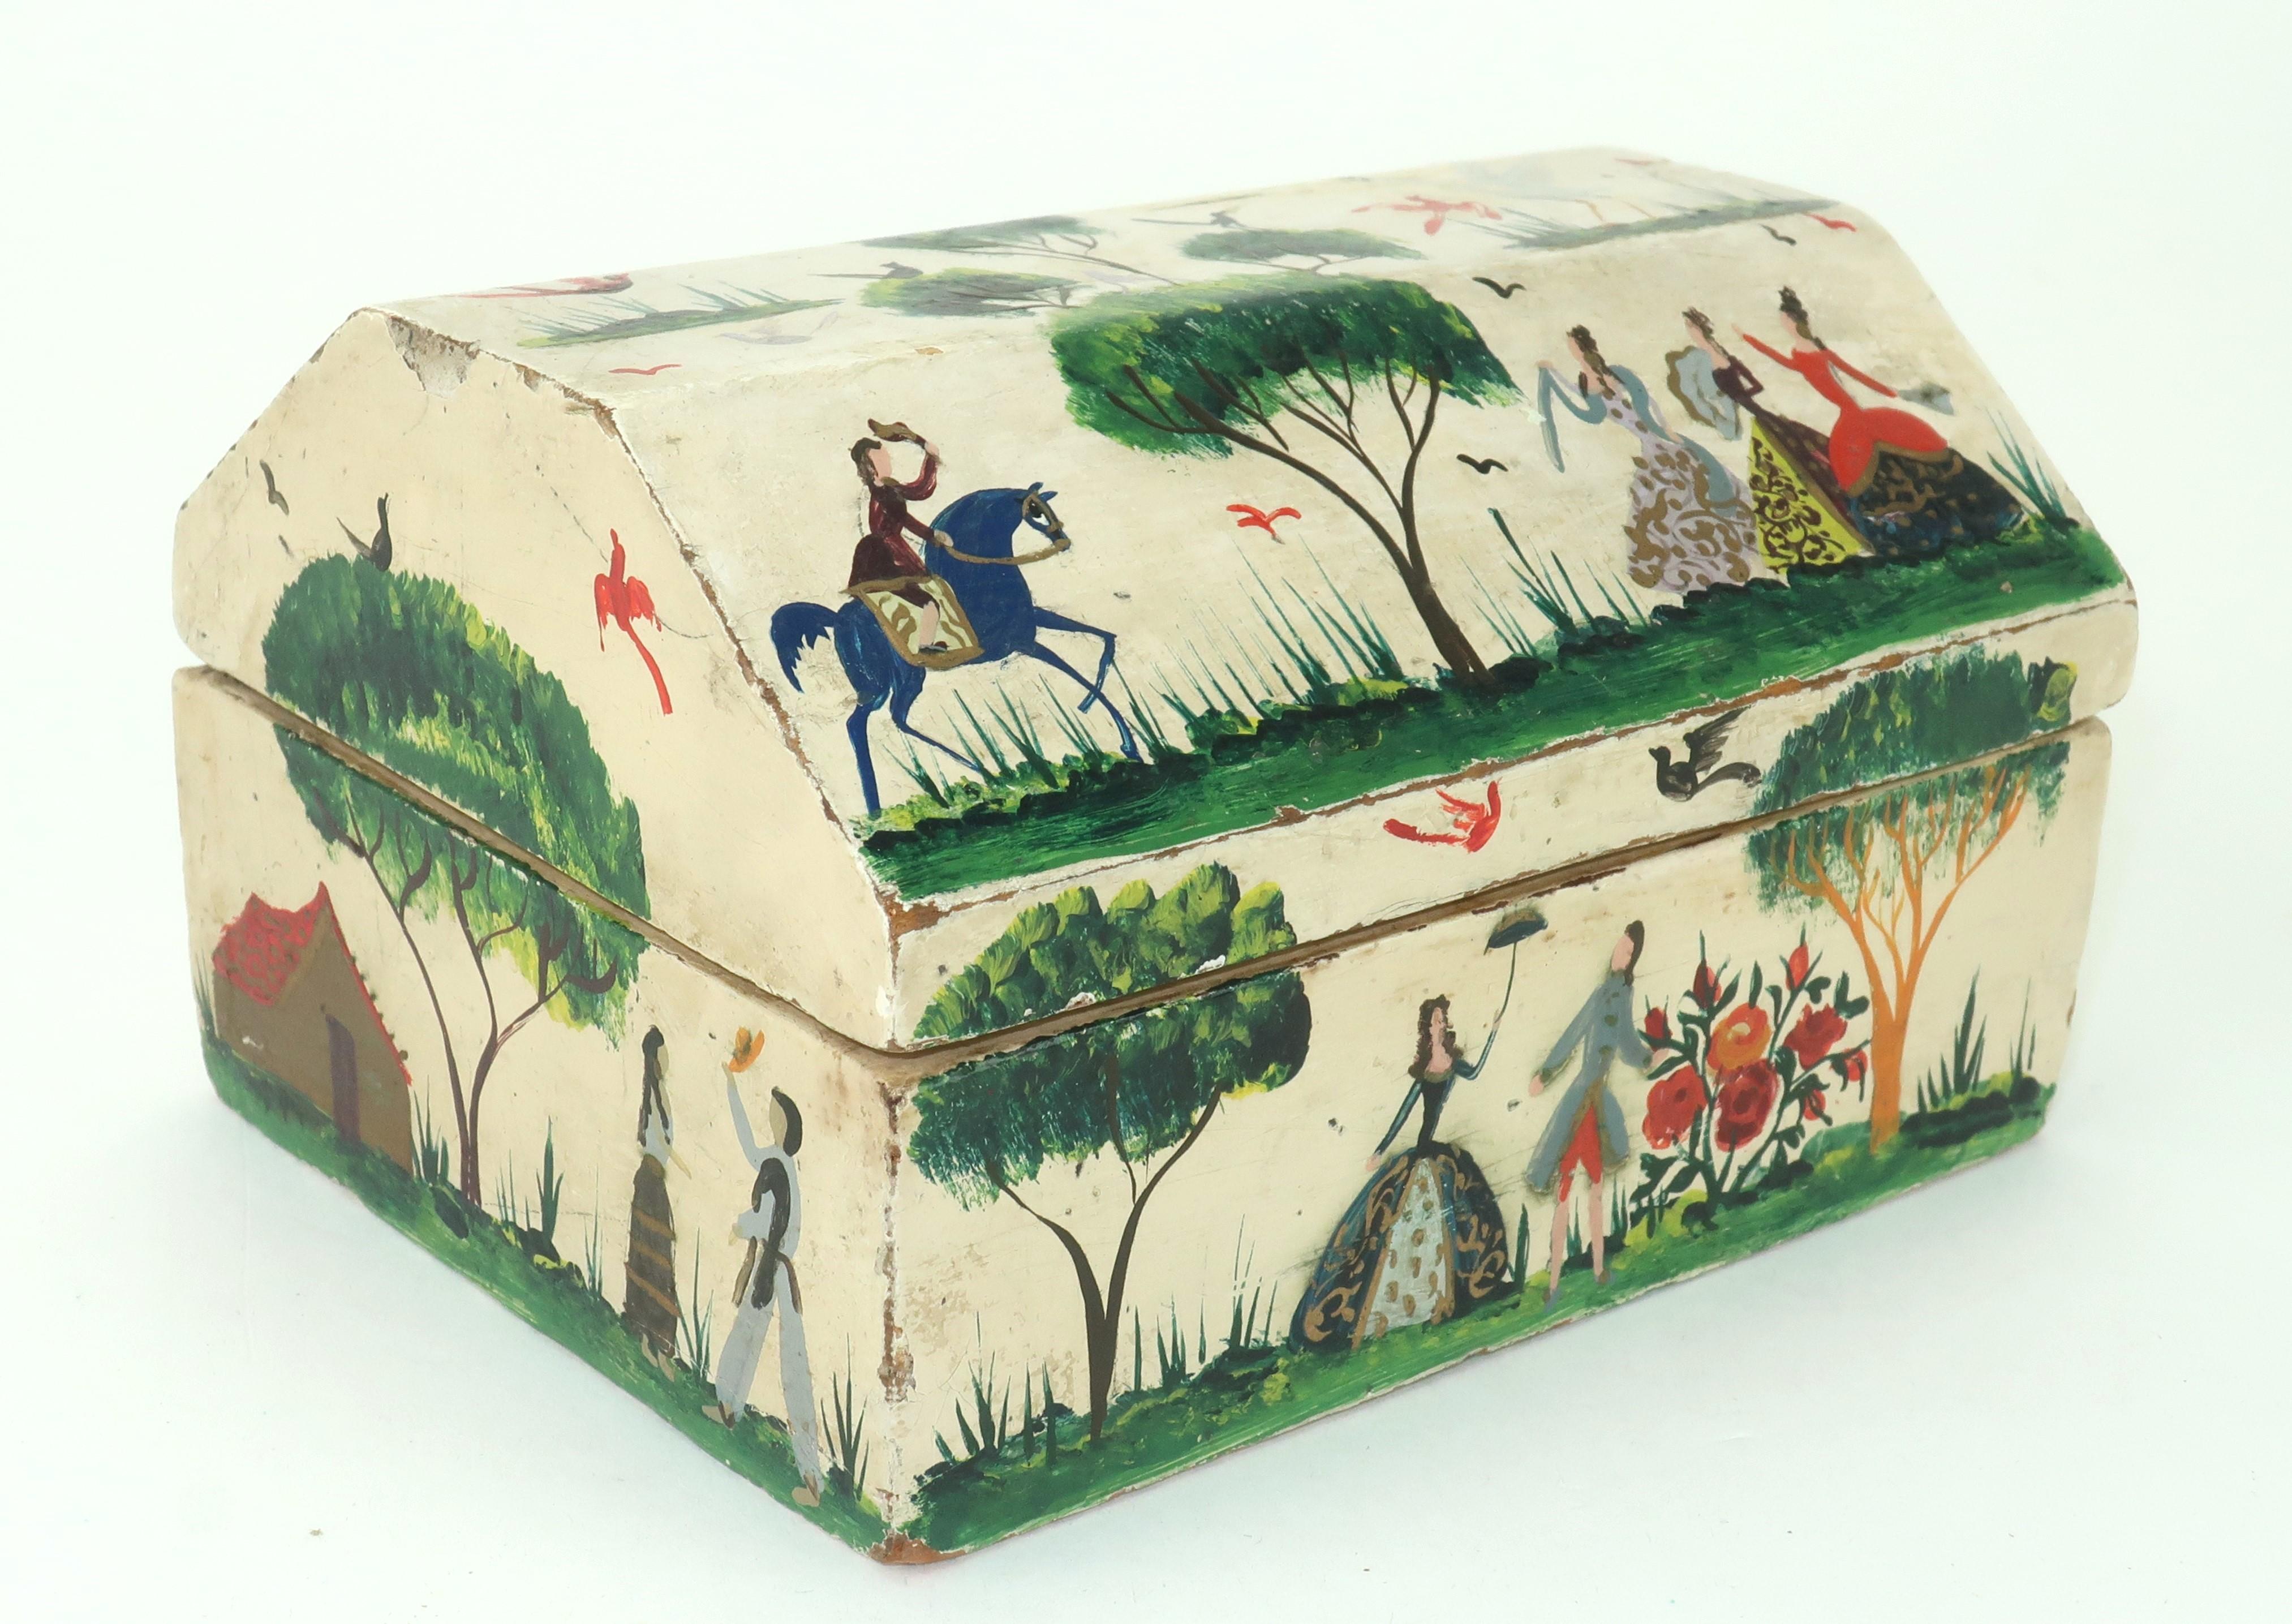 A charming tabletop wood box by self taught Mexican artist, Salvador Corona, who started his career as an artist after suffering a bullfight injury in the early 1900's. He gained a reputation for creating countryside scenes depicting life in Mexico